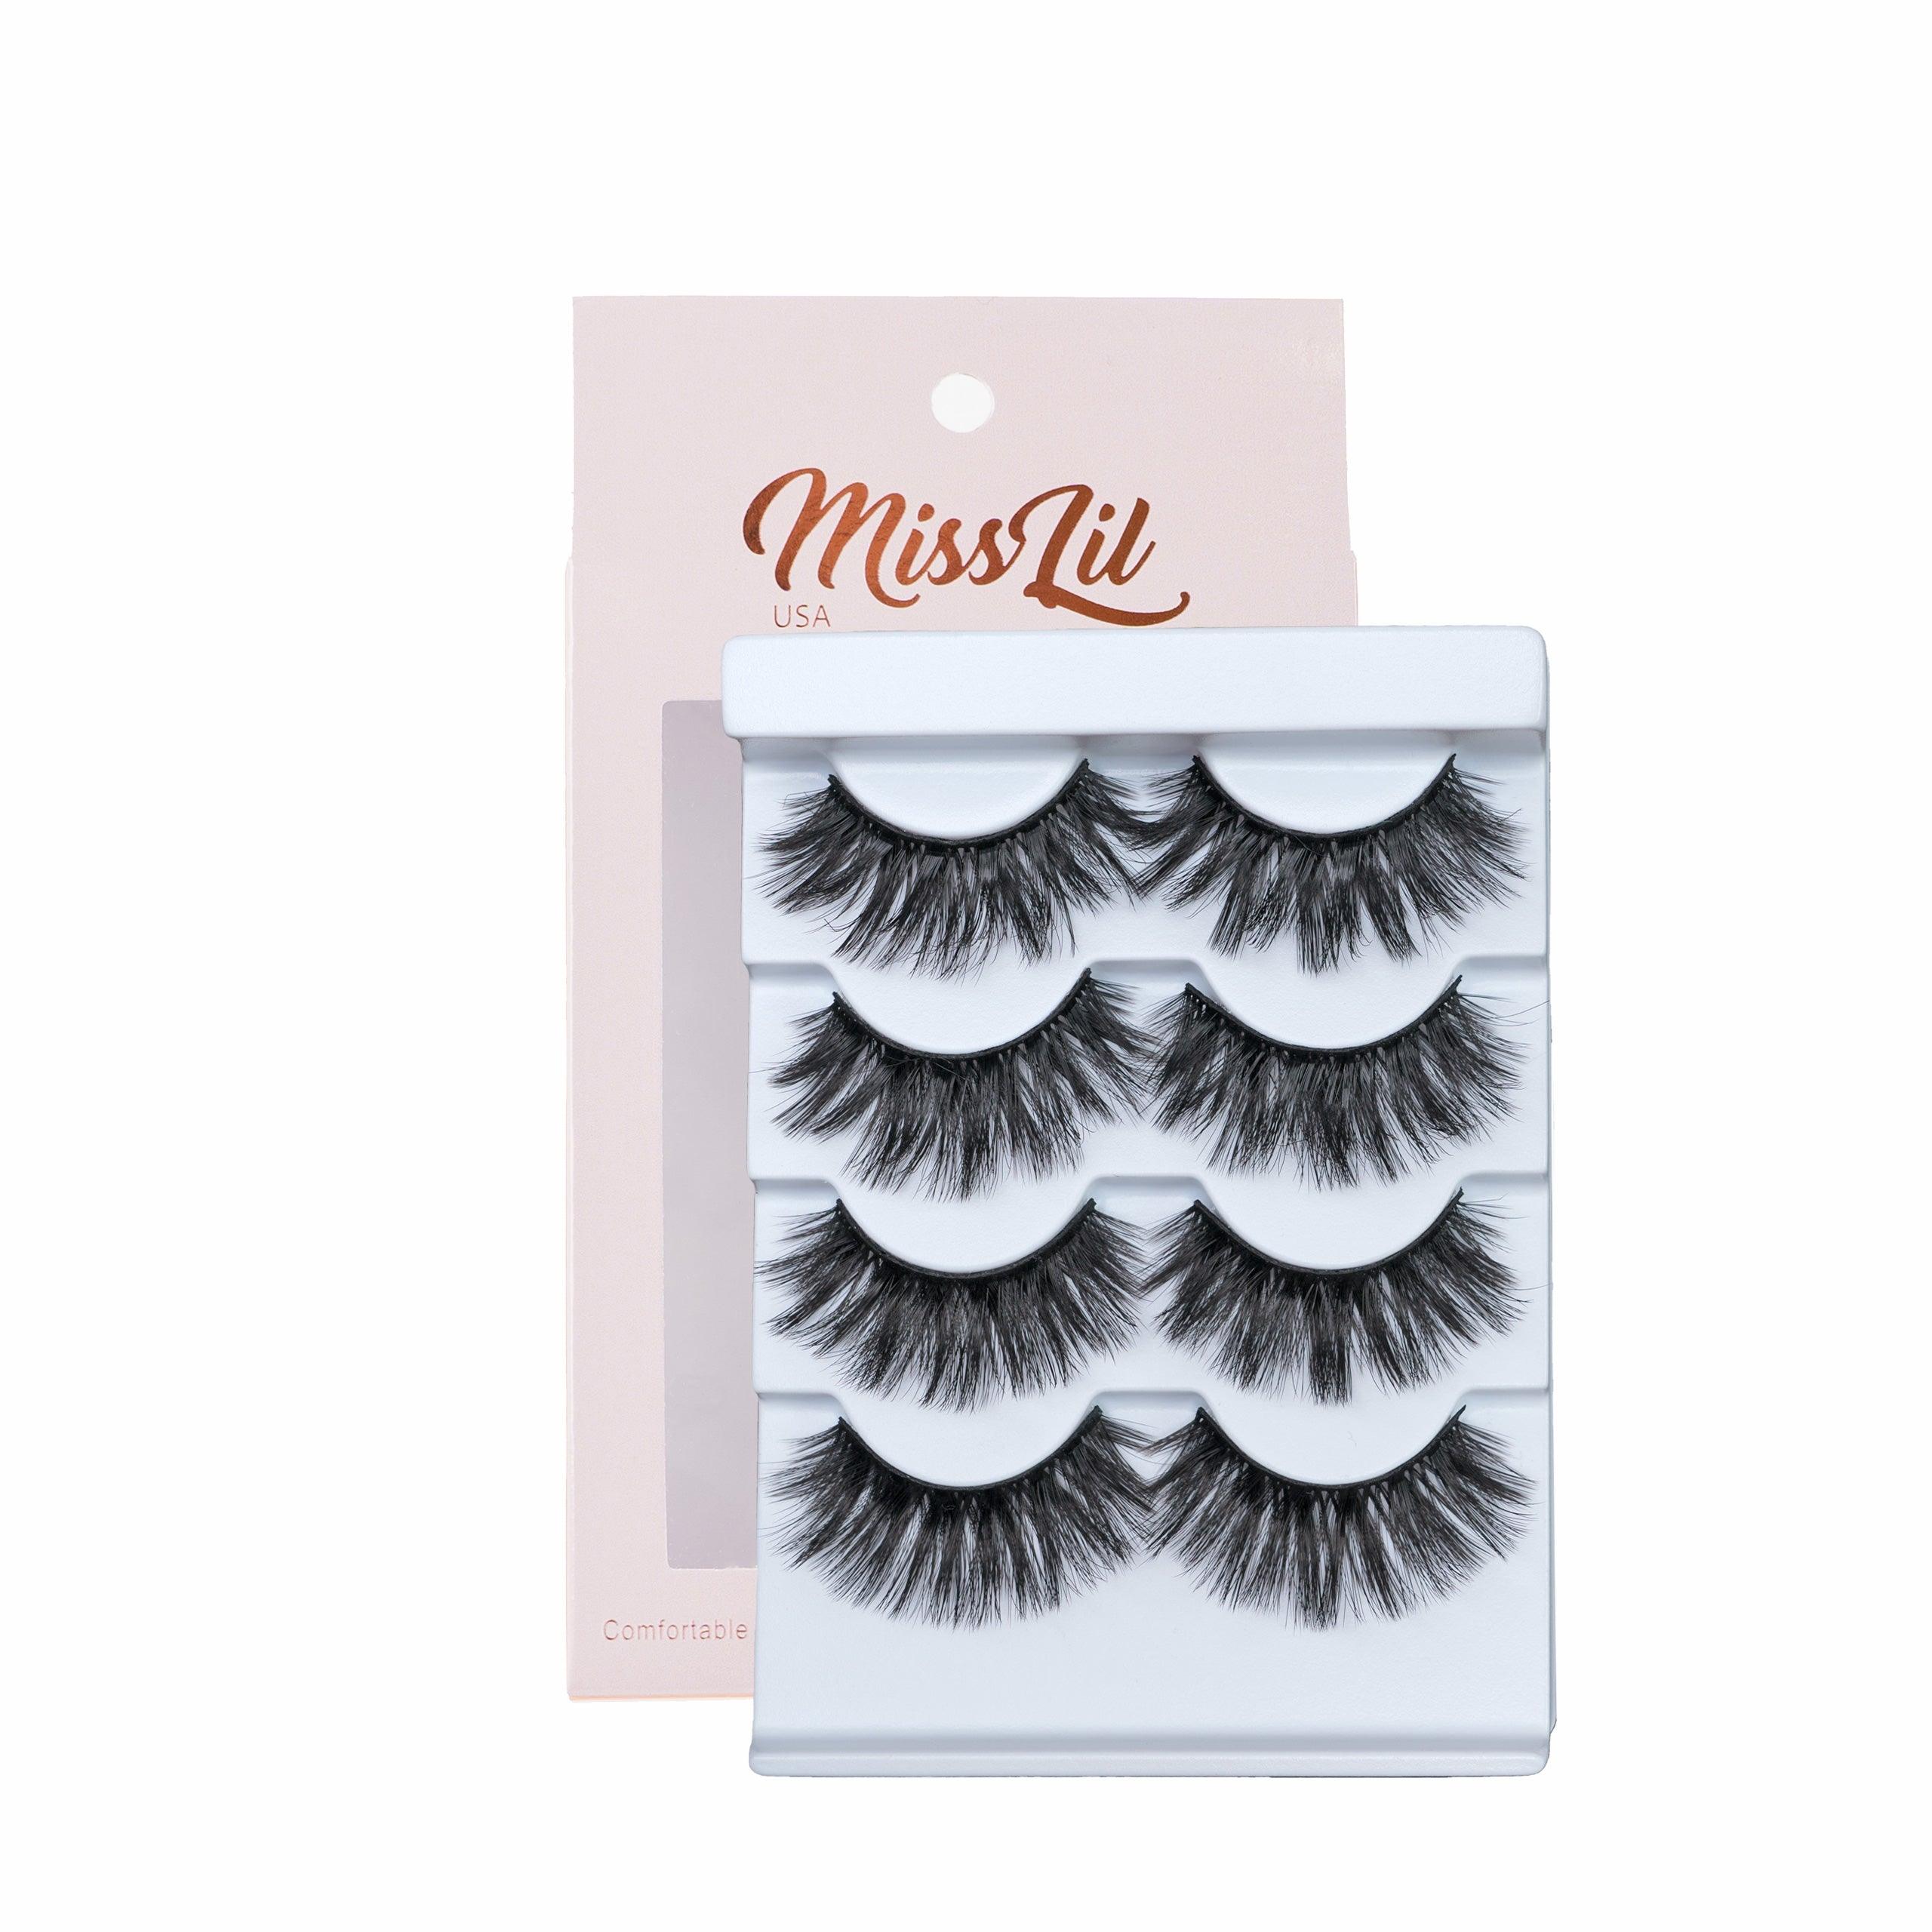 4 Pairs Lashes #10 #15 (Pack of 67) - Miss Lil USA